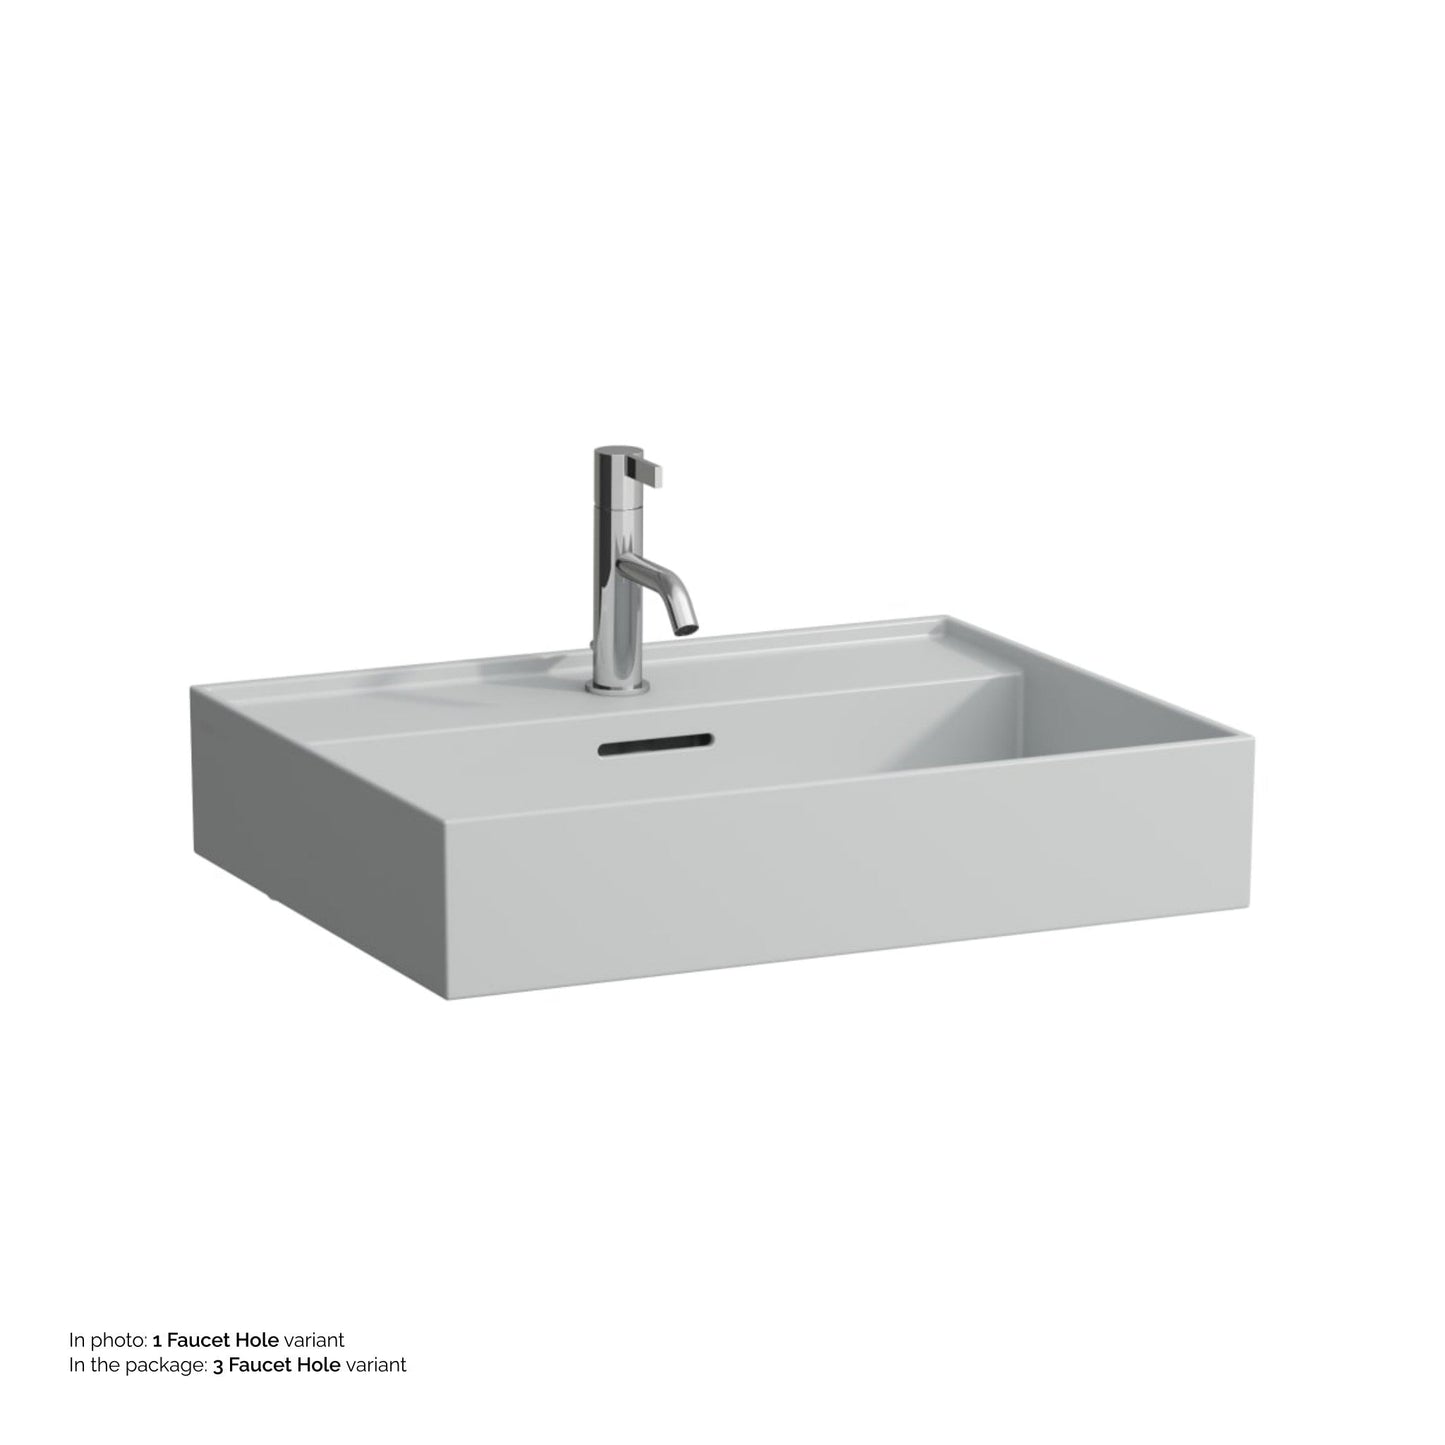 Laufen Kartell 24" x 18" Matte Gray Countertop Bathroom Sink With 3 Faucet Holes